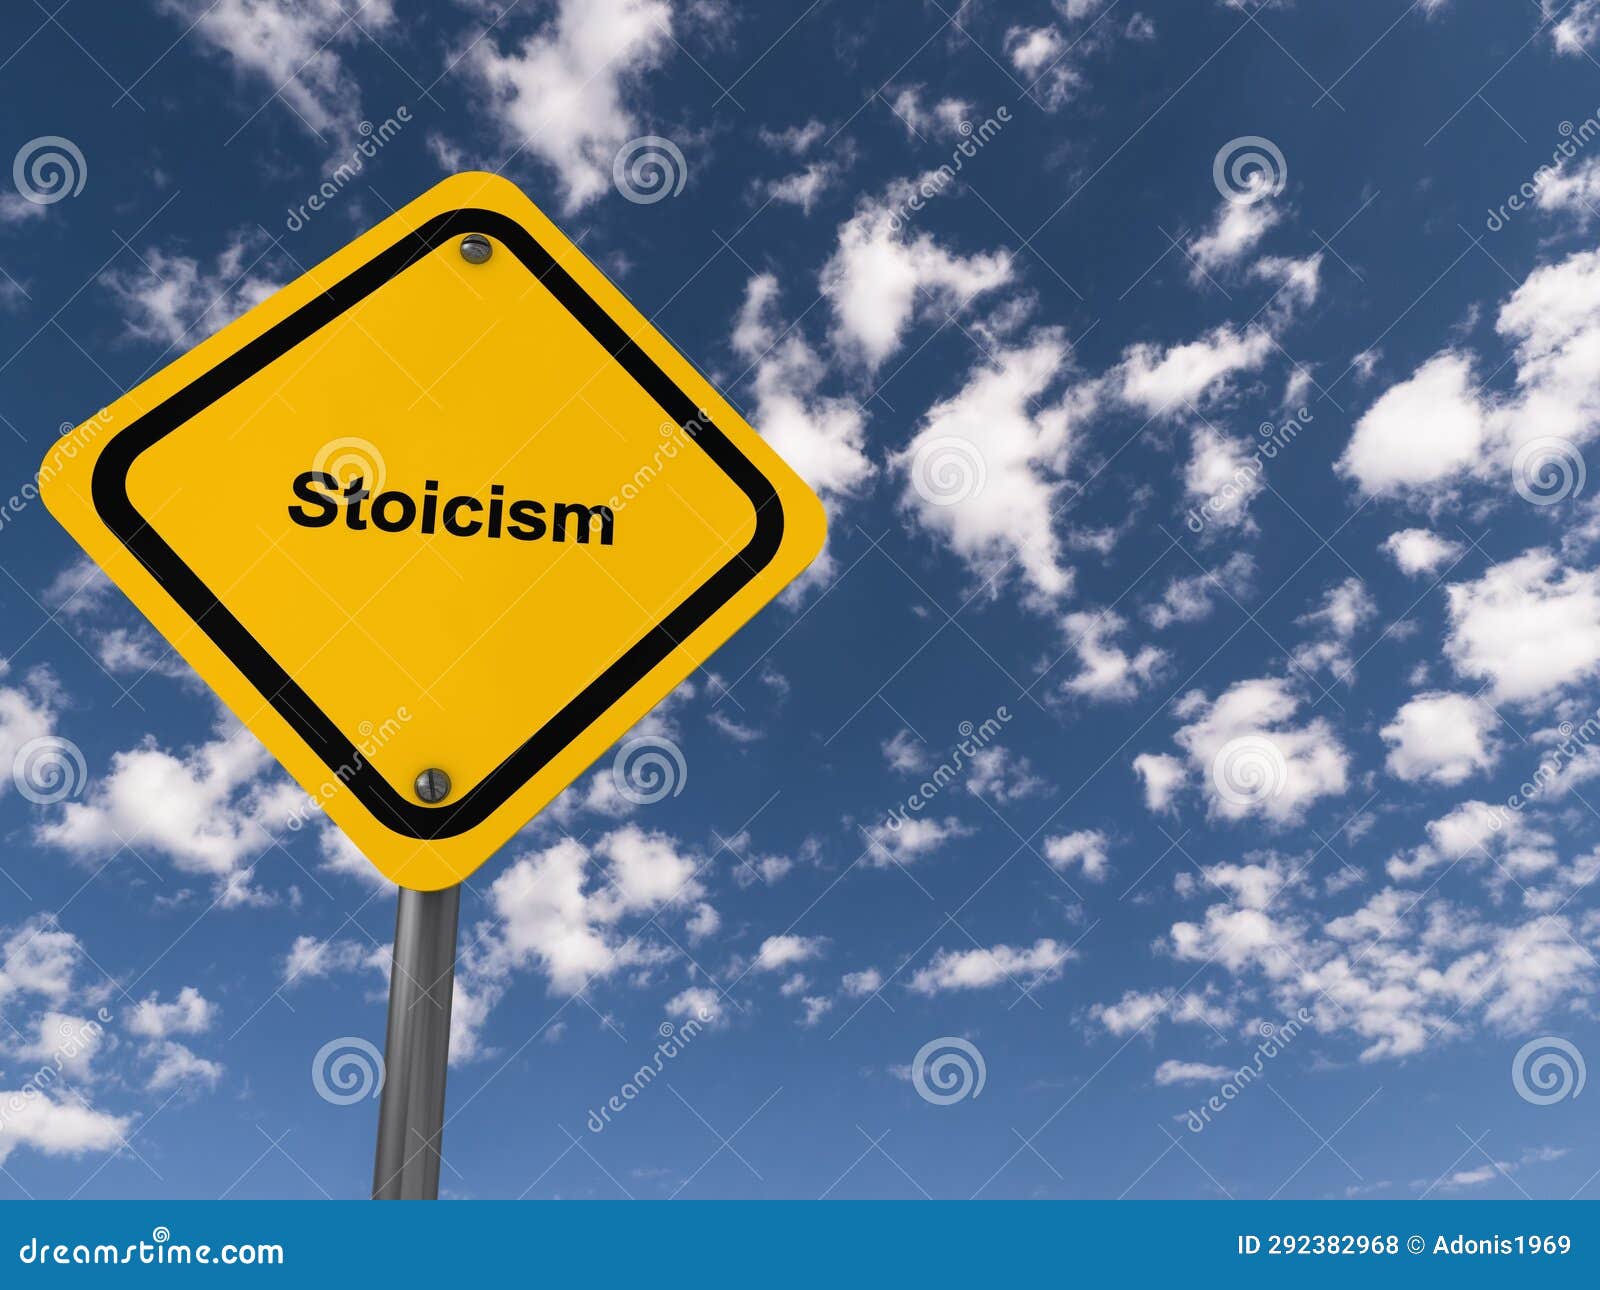 stoicism traffic sign on blue sky